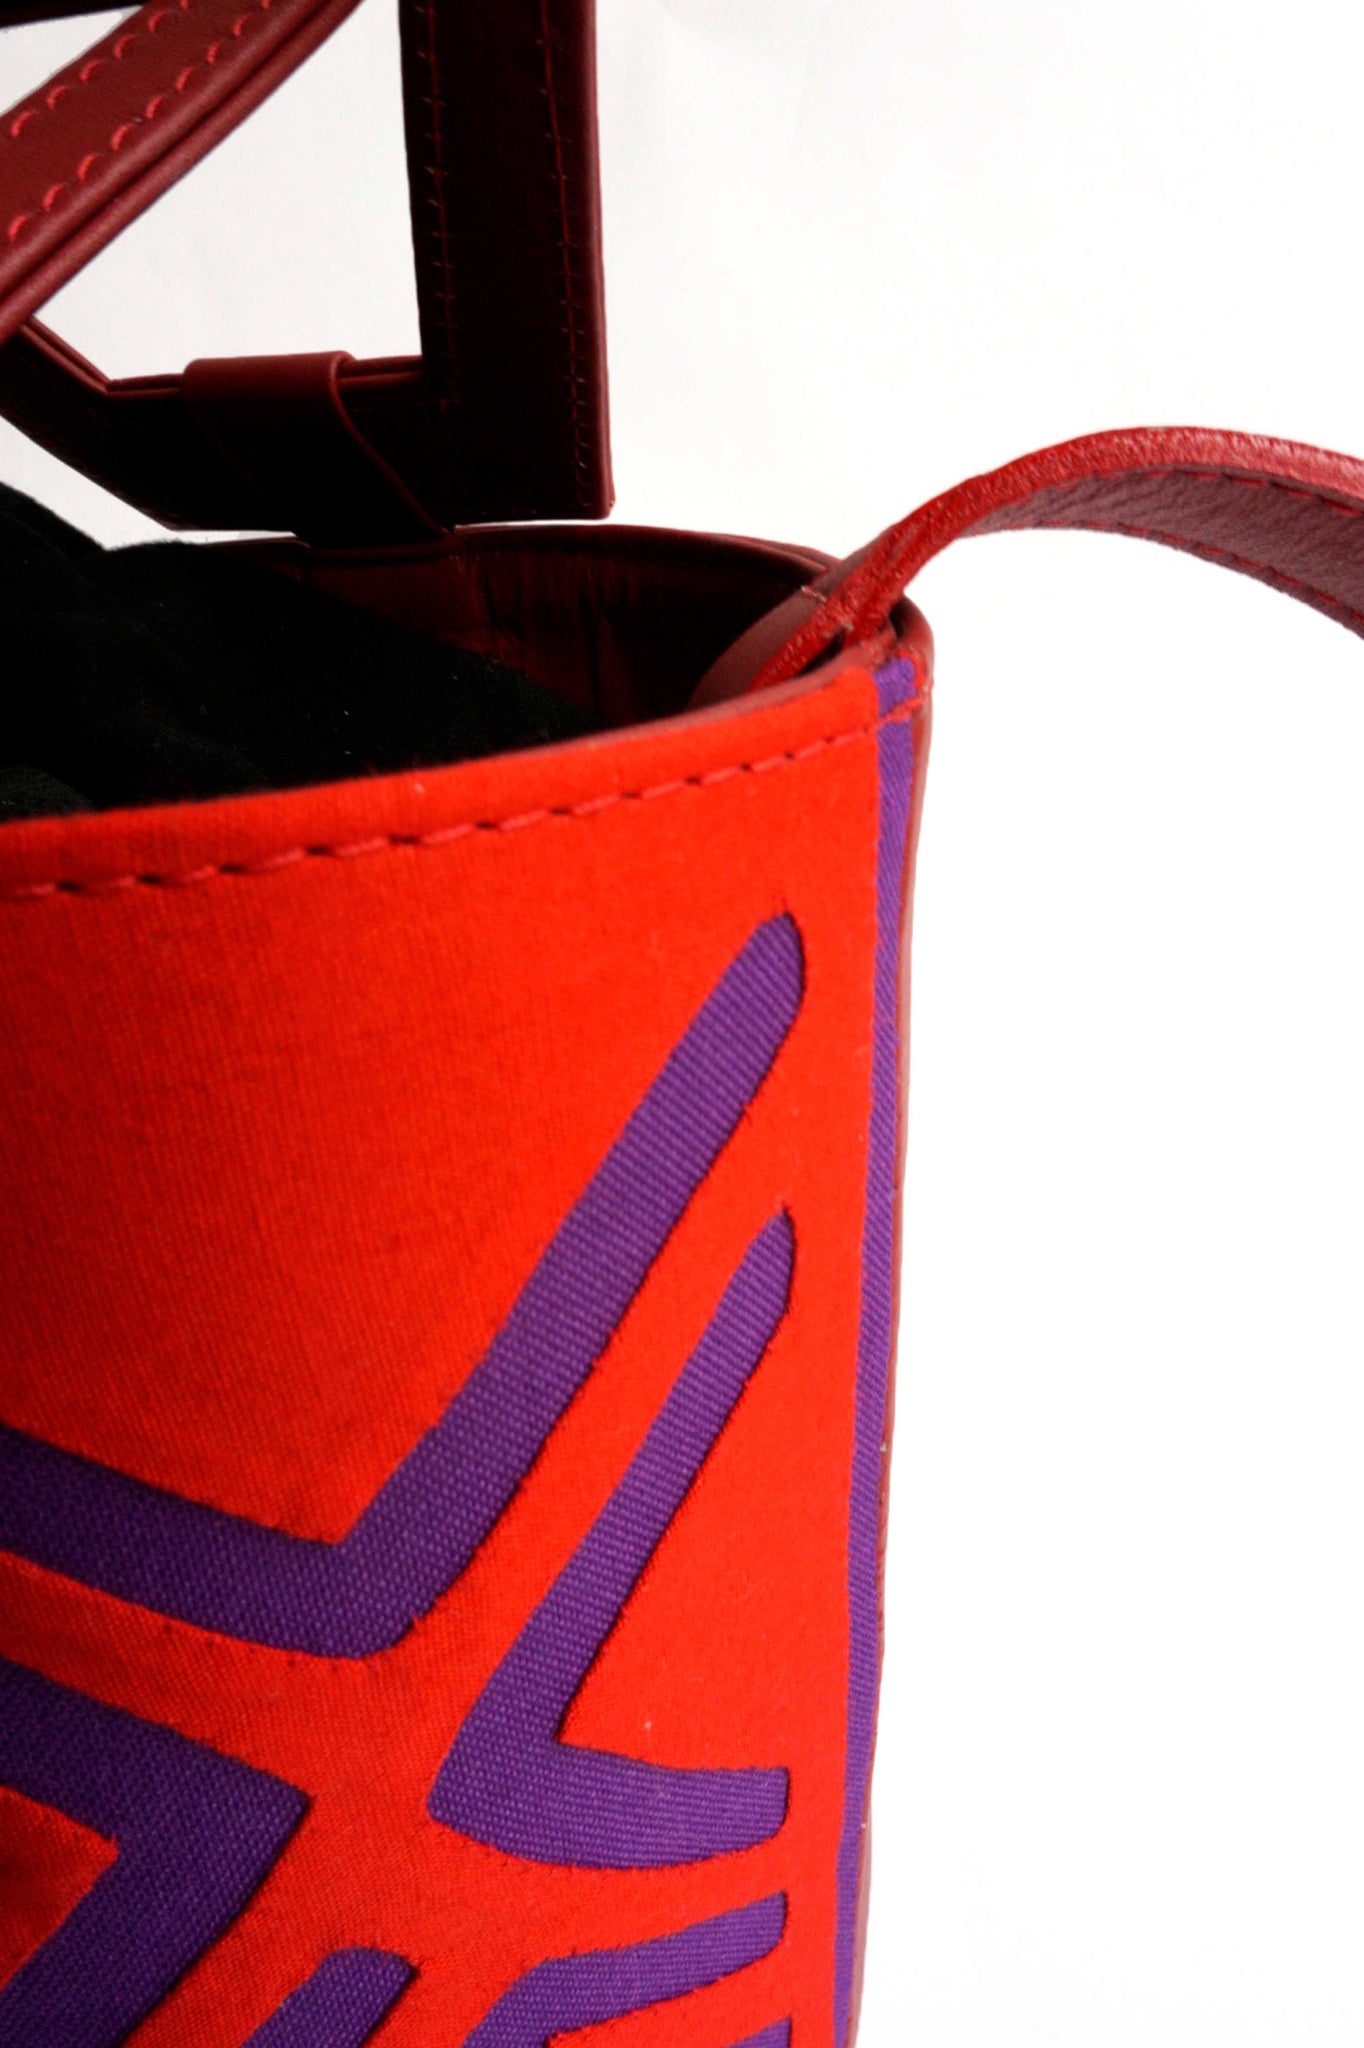 Nabba Tote by Fe Handbags. Handmade in Colombia. Nabba Bag featuring a bright denim Mola made by indigenous people from the Gunadule Tribe. Polished gunmetal gold plated metal fastenings. Detachable leather strap for alternative styling. Color red. 100% calfskin leather.